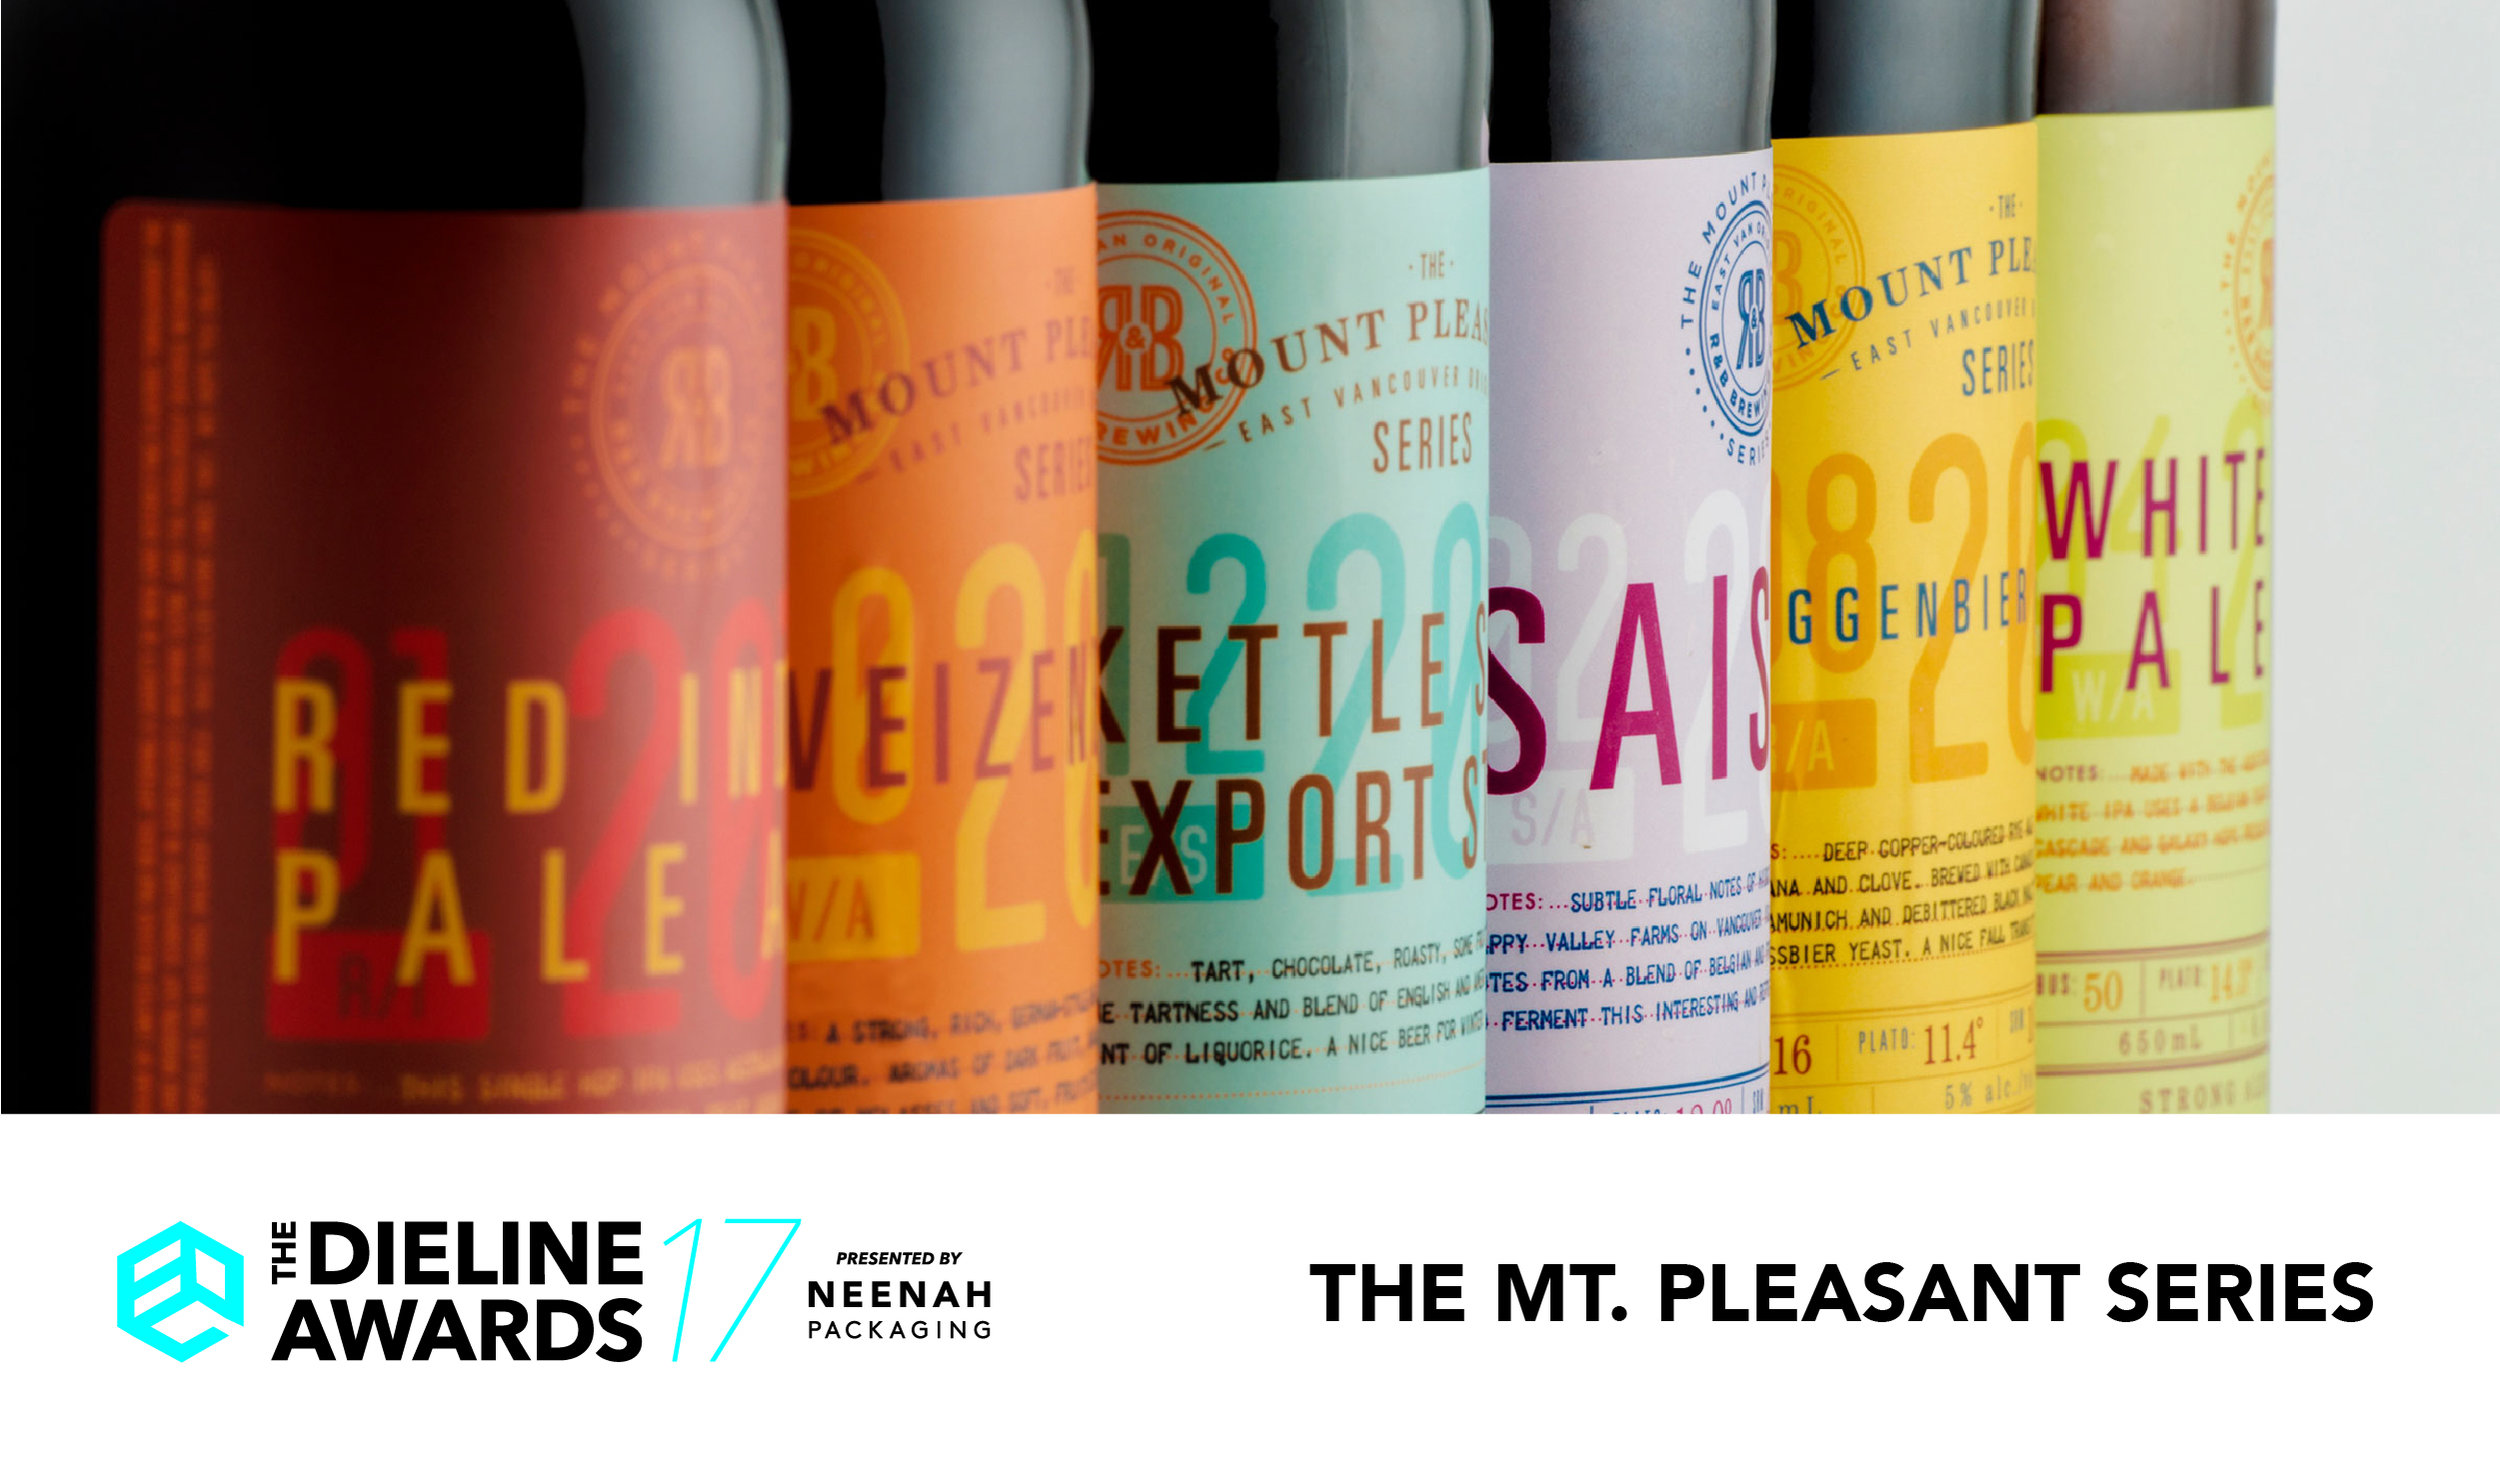 The Dieline Awards 2017 Outstanding Achievements: The Mt. Pleasant Series